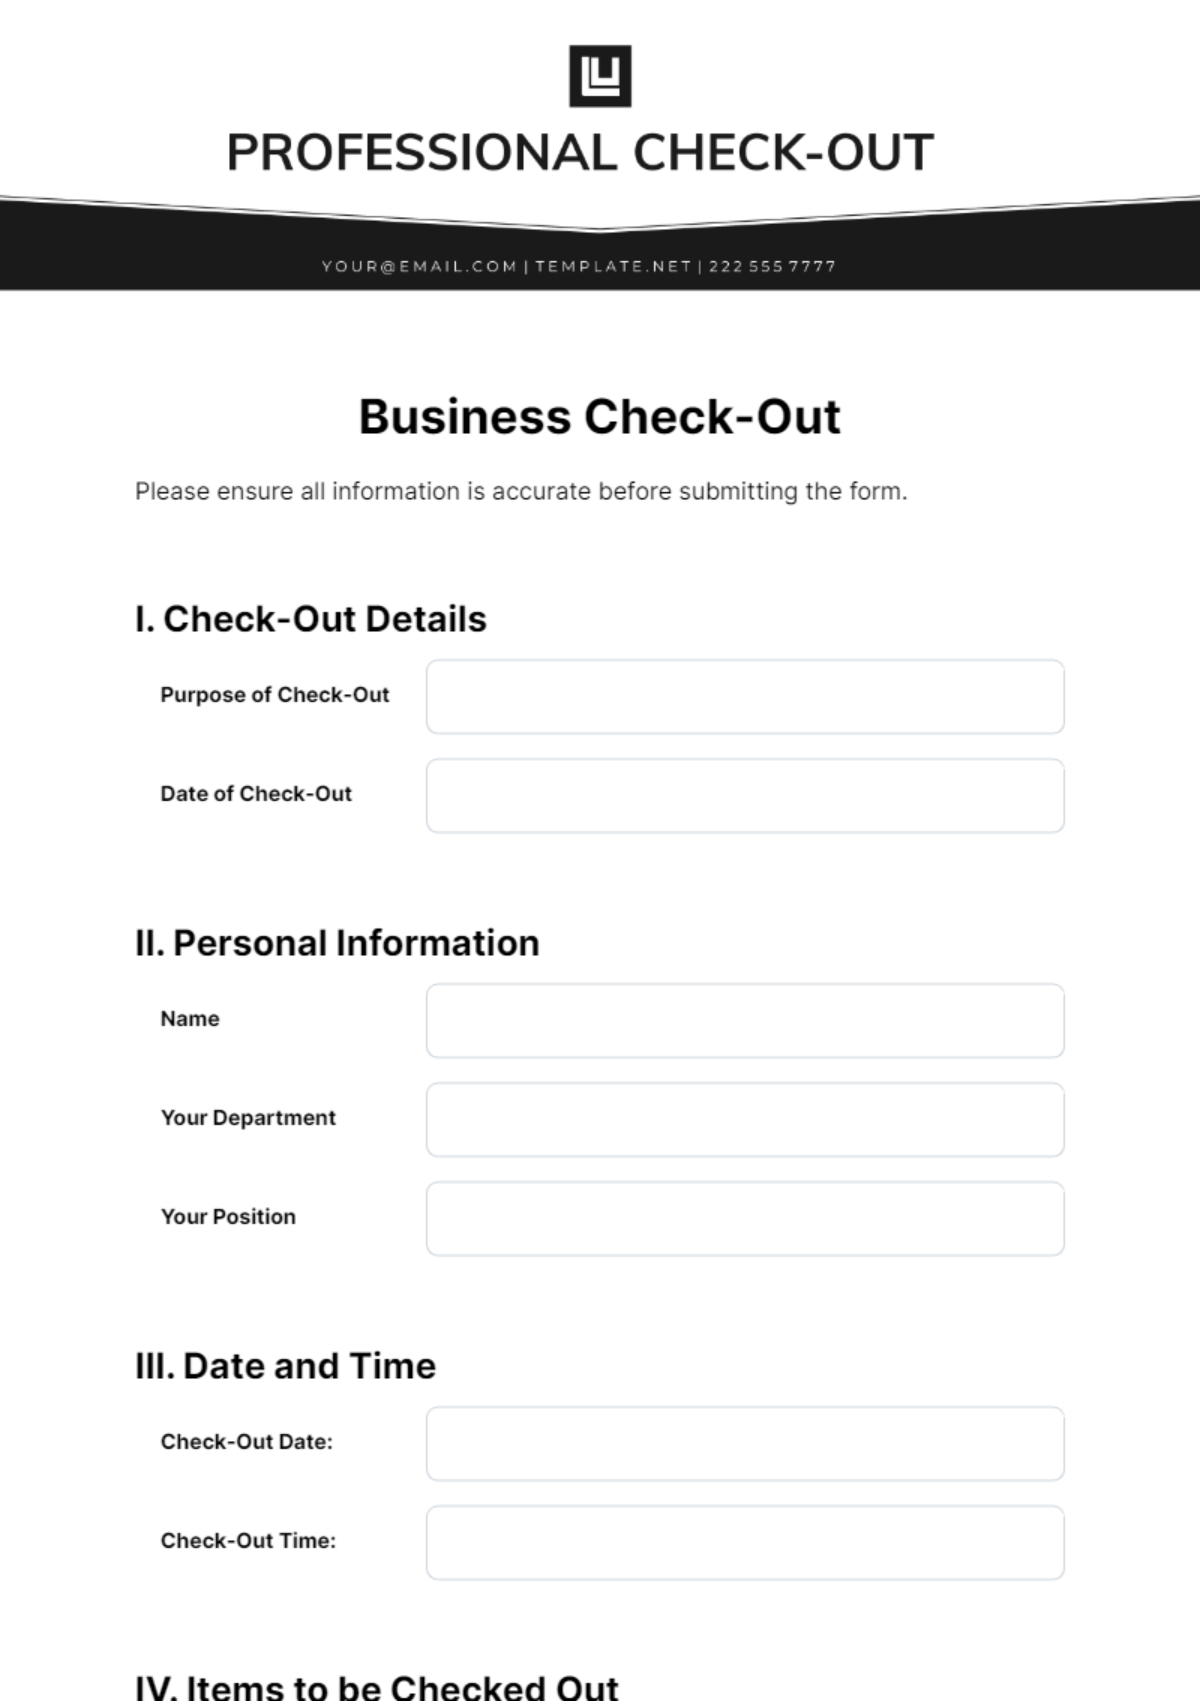 Business Check-Out Template